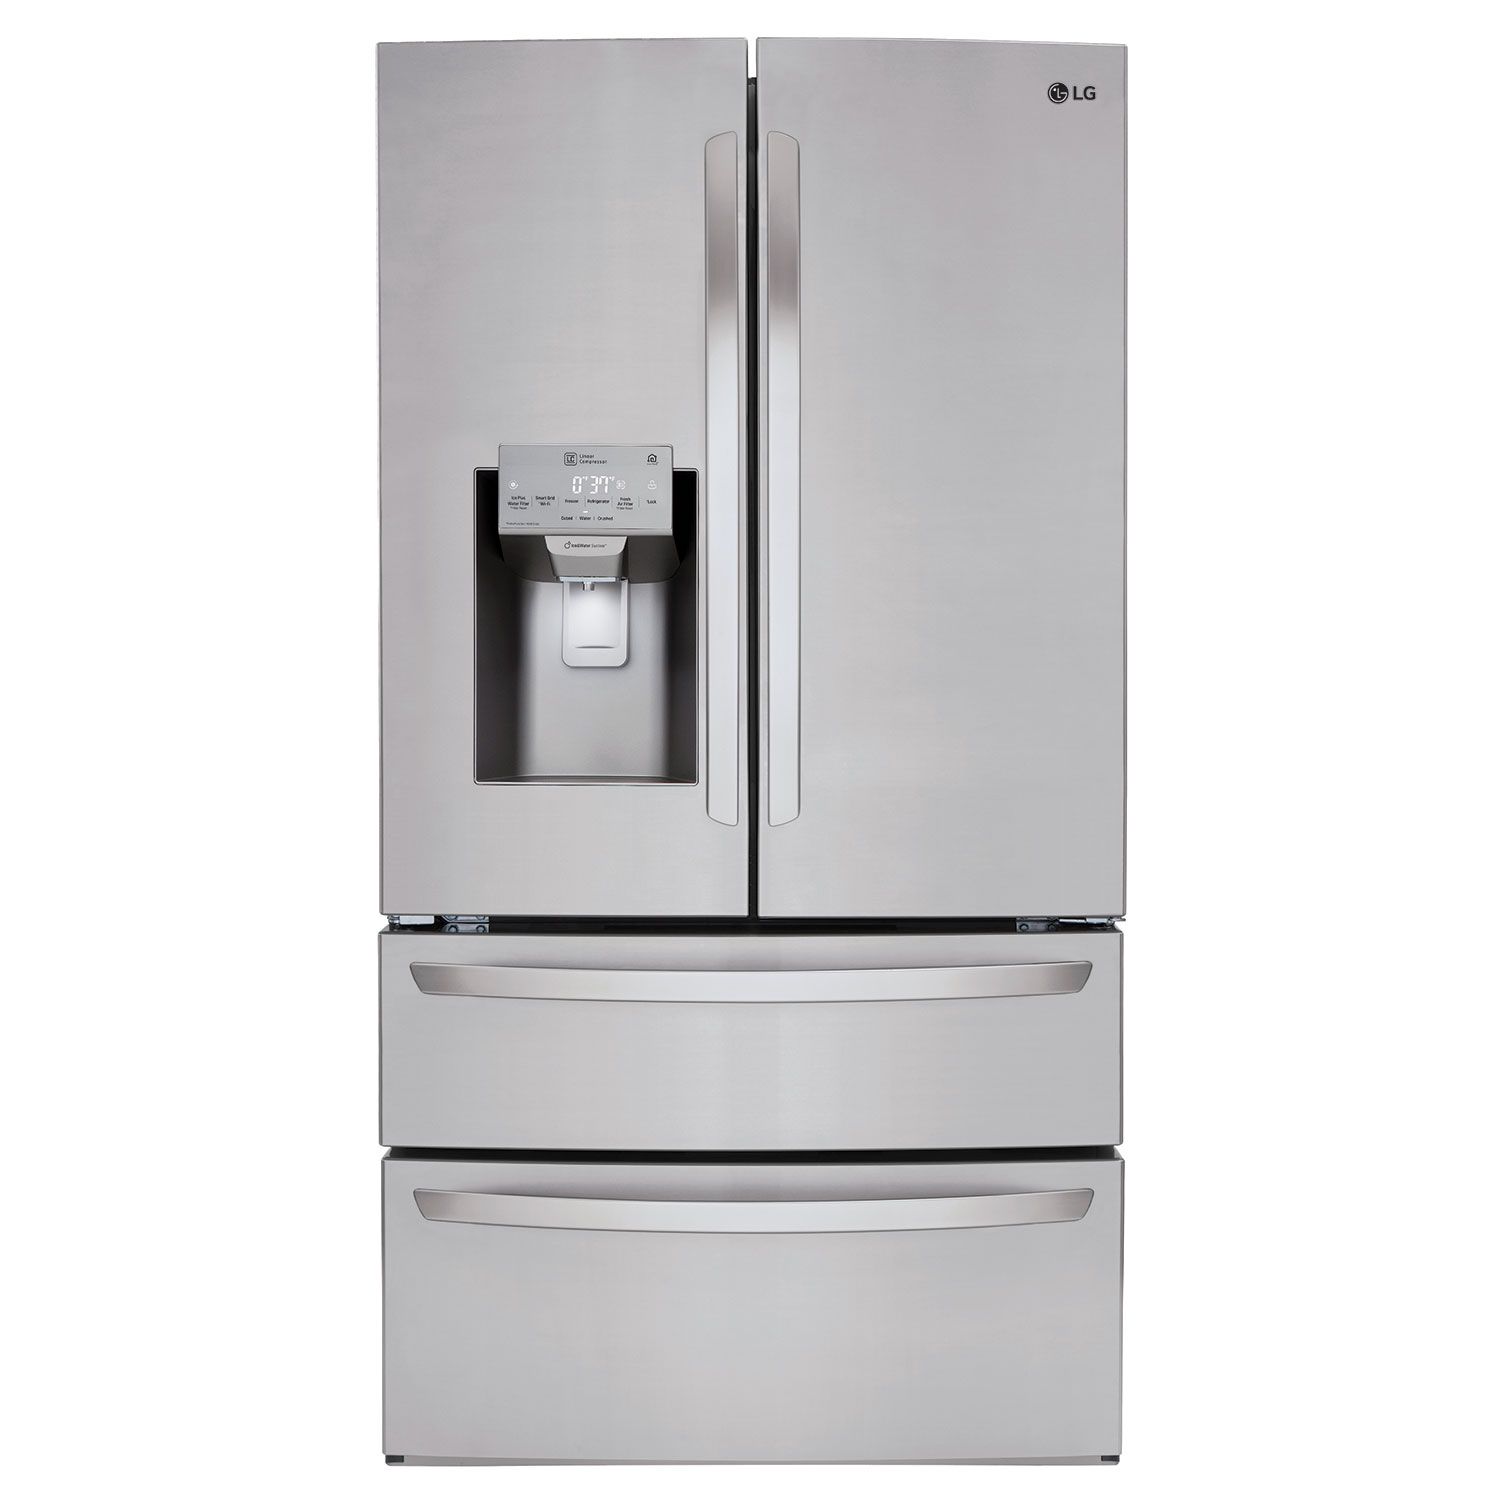 LG LMXS28626S 28 cu ft Ultra Large Capacity 4-Door French Door Refrigerator in Stainless Steel Finish